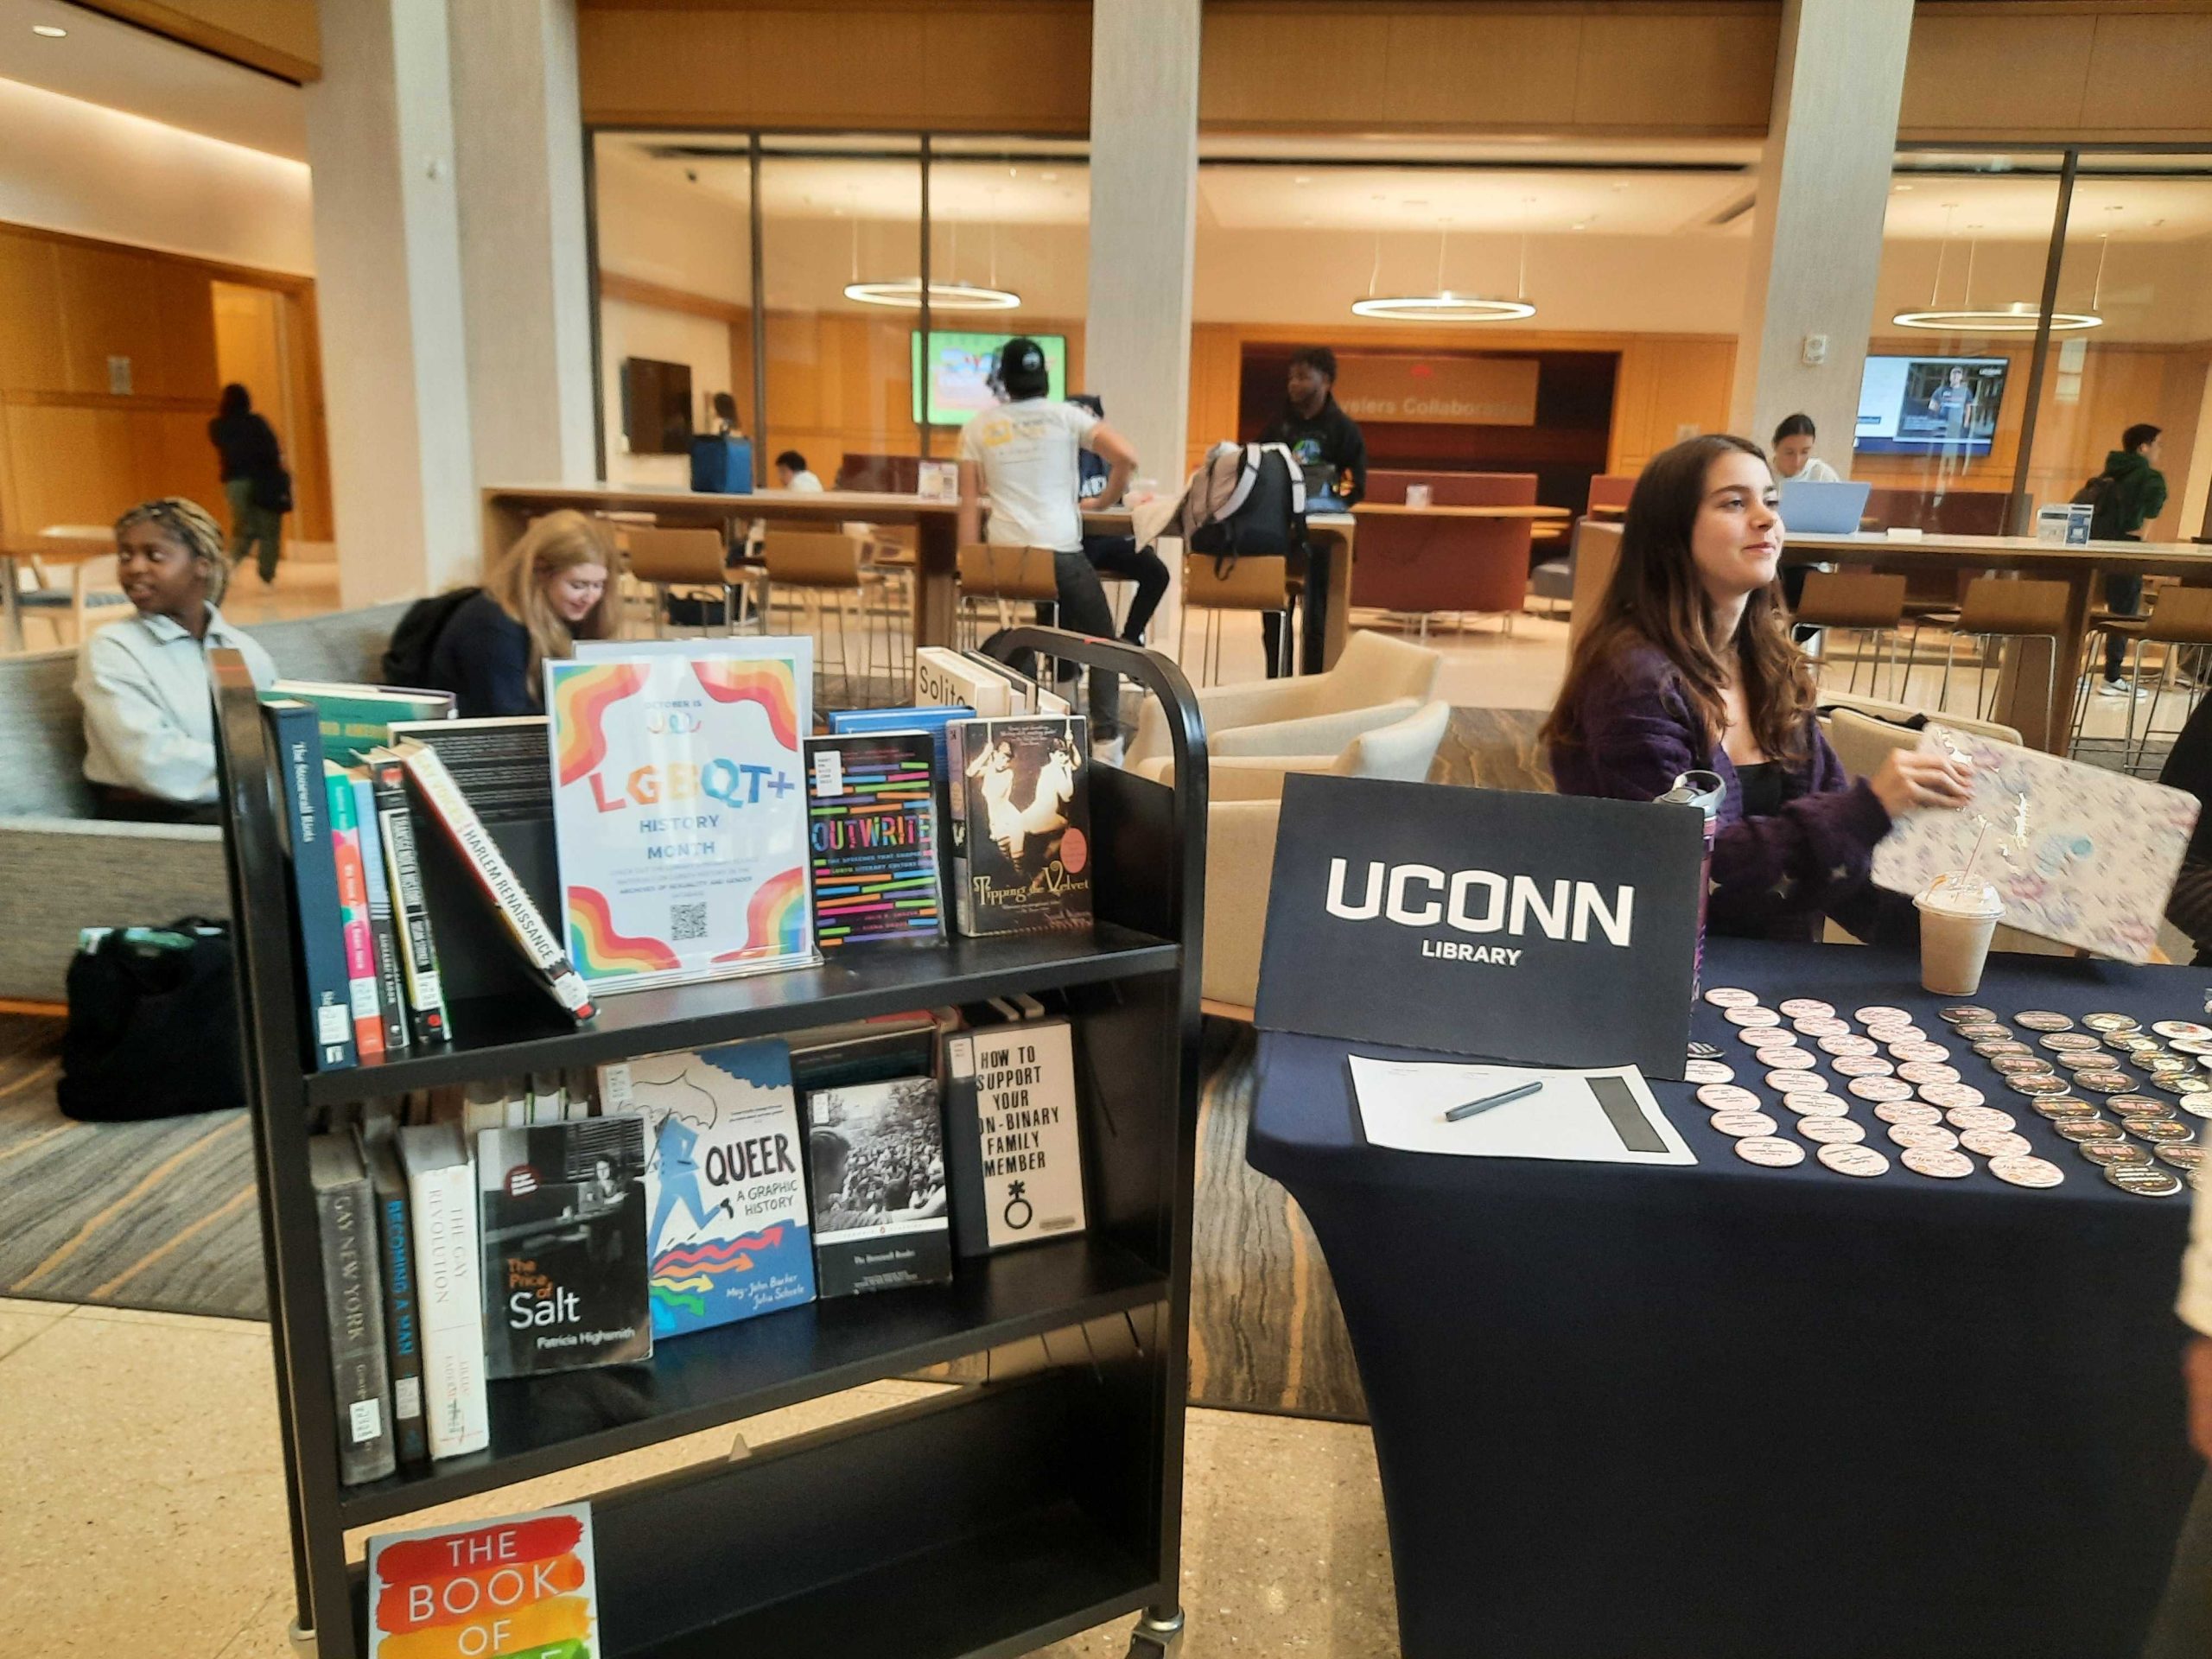 UConn Library Harford staff tabling at an event